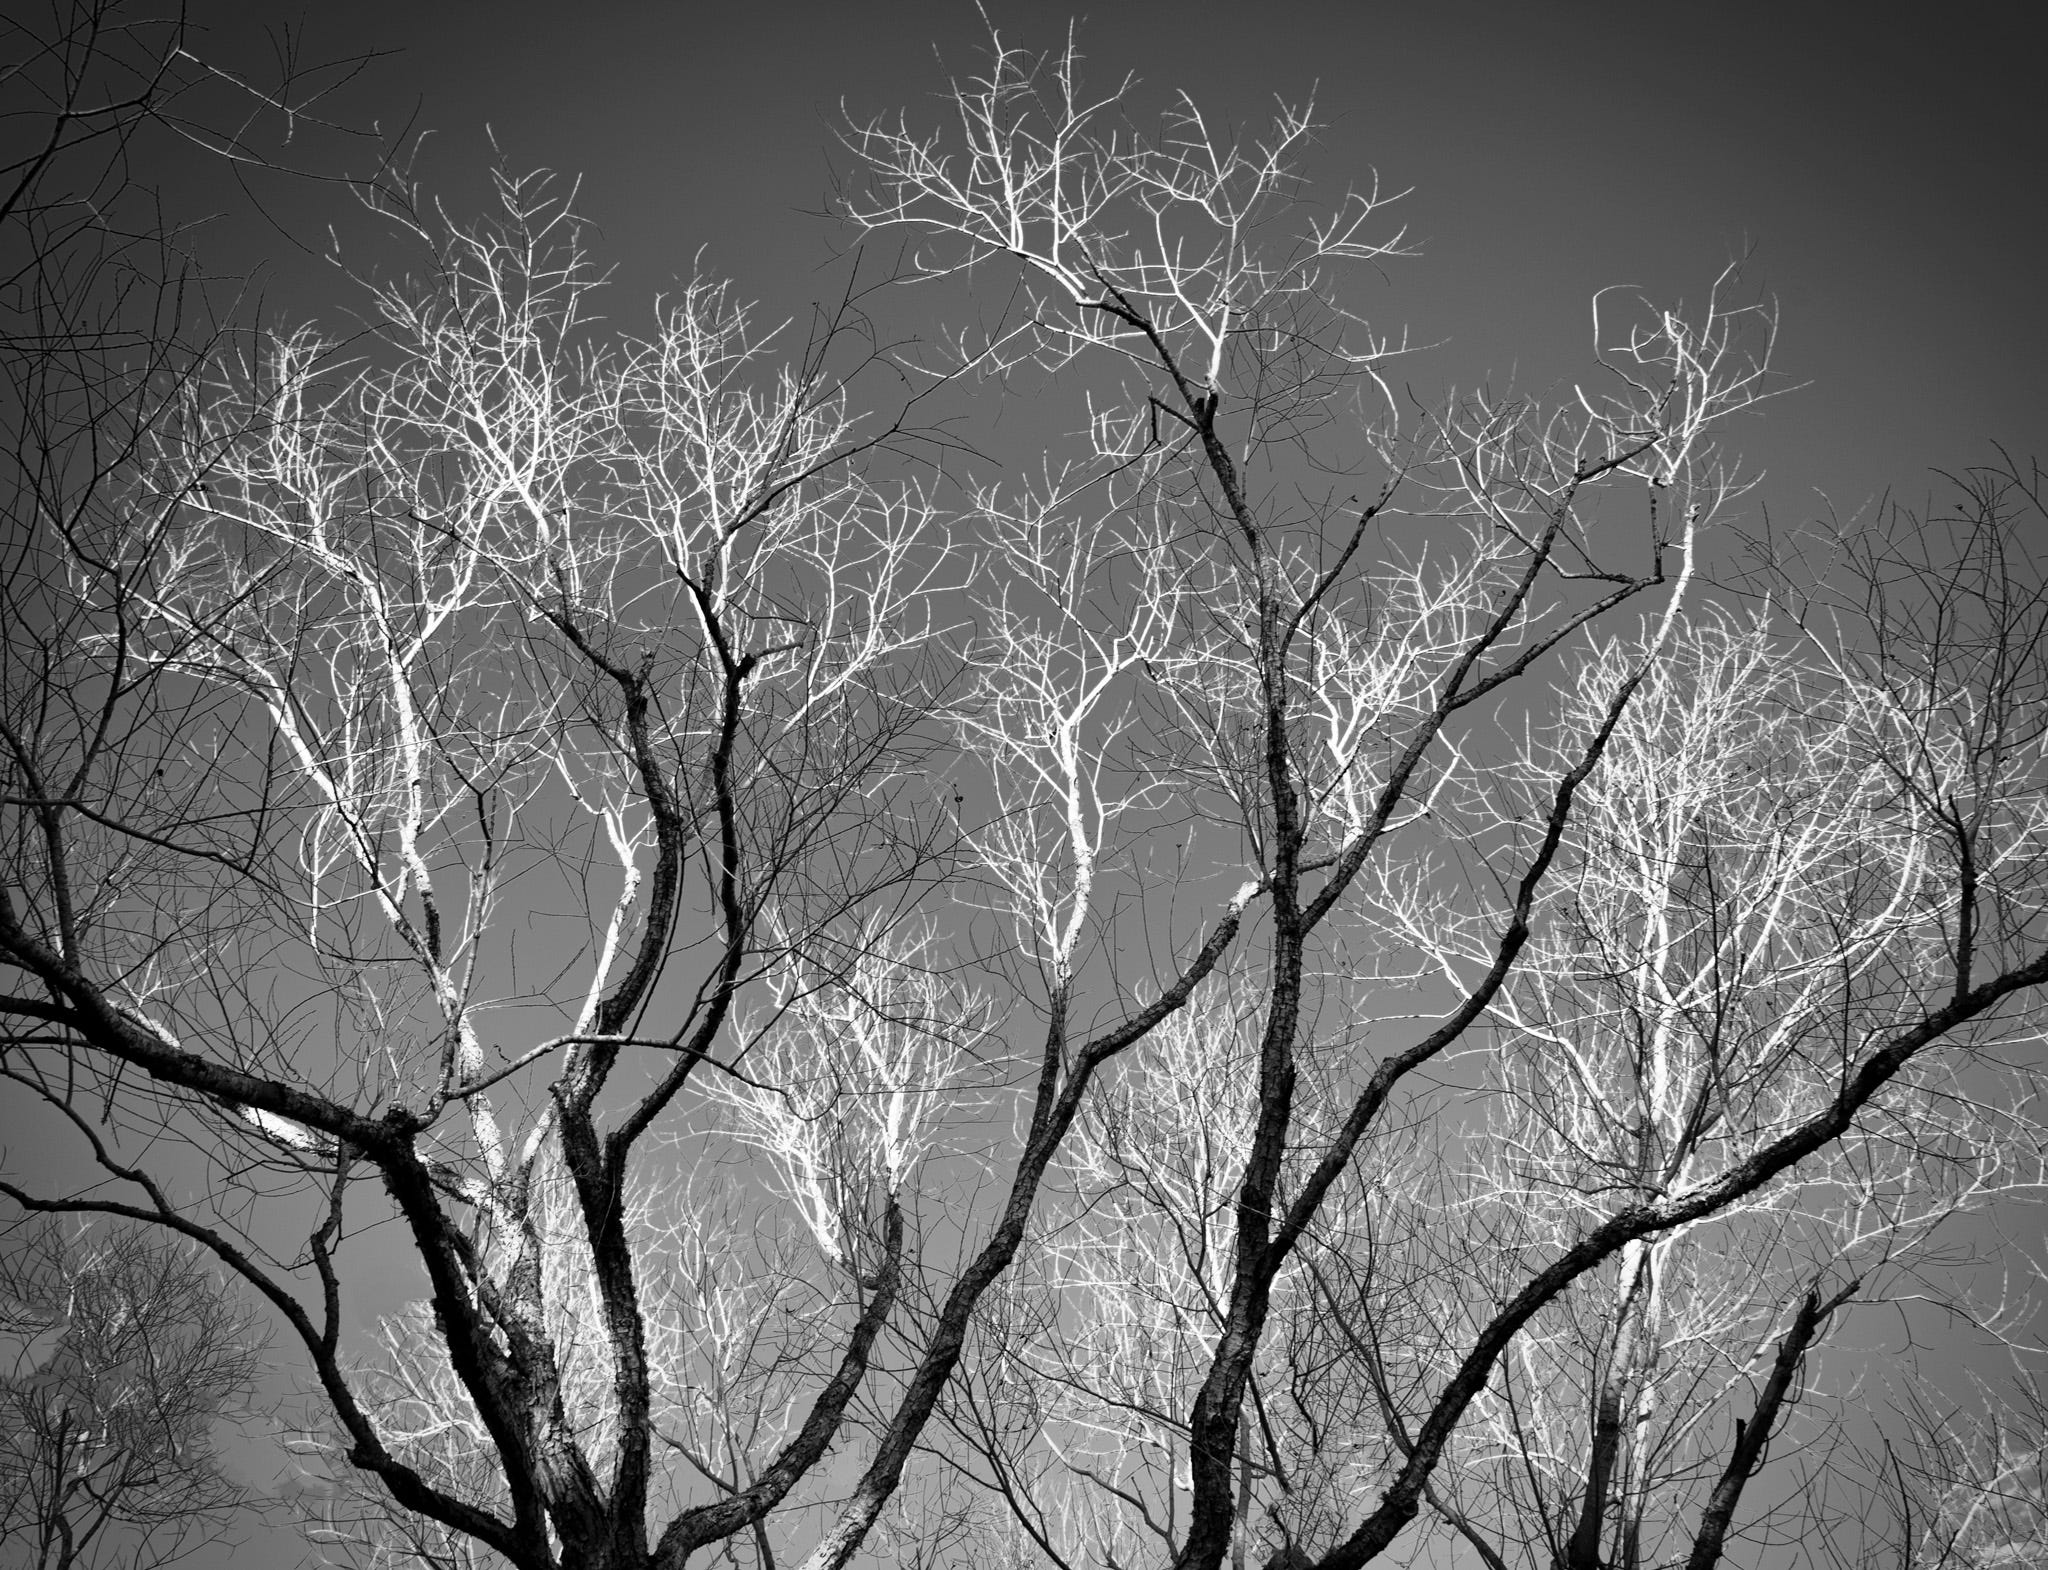 Black and white photo of the sunlight shining through the bare limbs of a tree